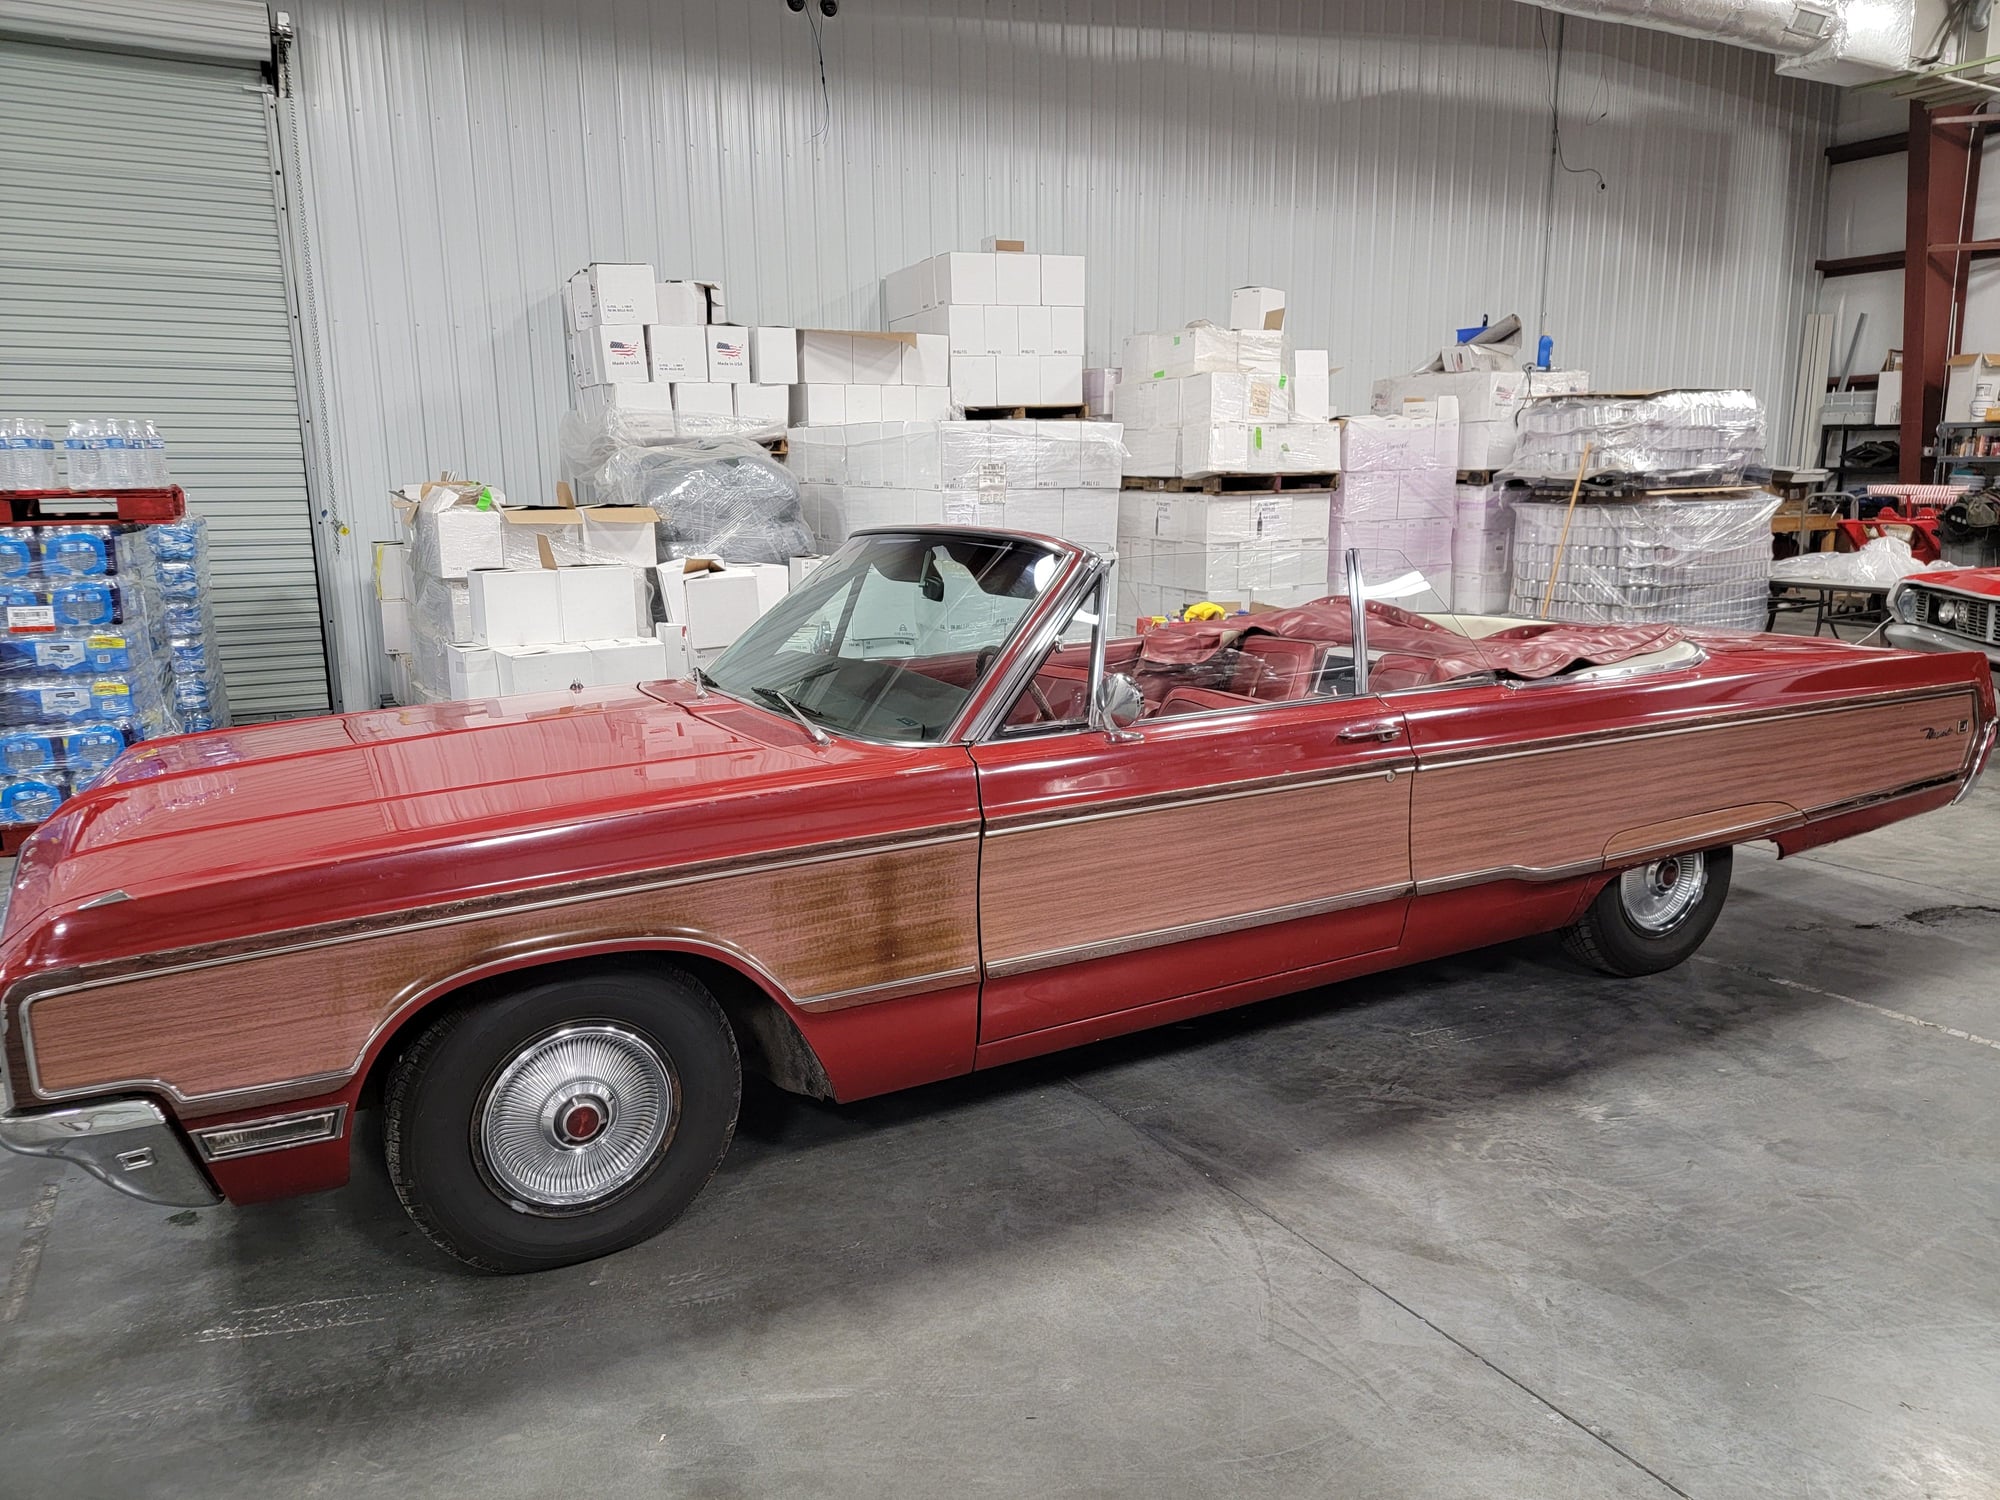 1970 Chrysler Newport - 1968 Chrysler Newport $17,500 - Used - VIN CE27G8C311241 - 47,000 Miles - 8 cyl - 2WD - Automatic - Convertible - Red - Greenfield, IN 46140, United States